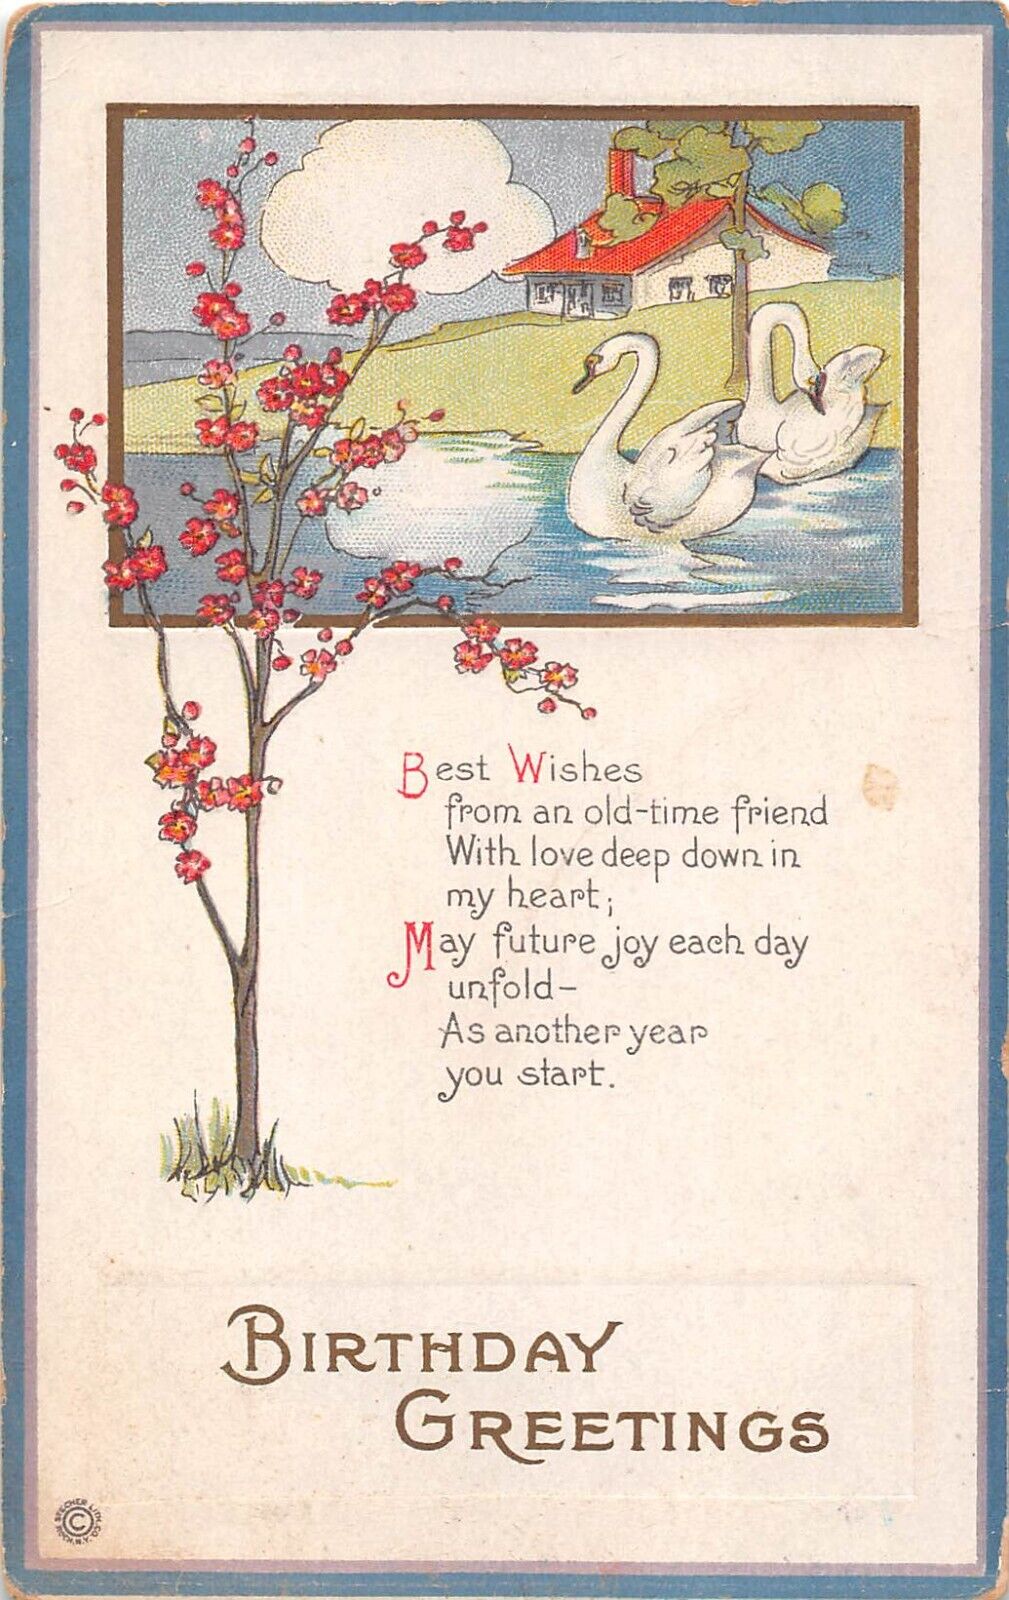 Swans Swimming on River Near a Home-Old Stecher Art Deco Birthday PC-Series 532A